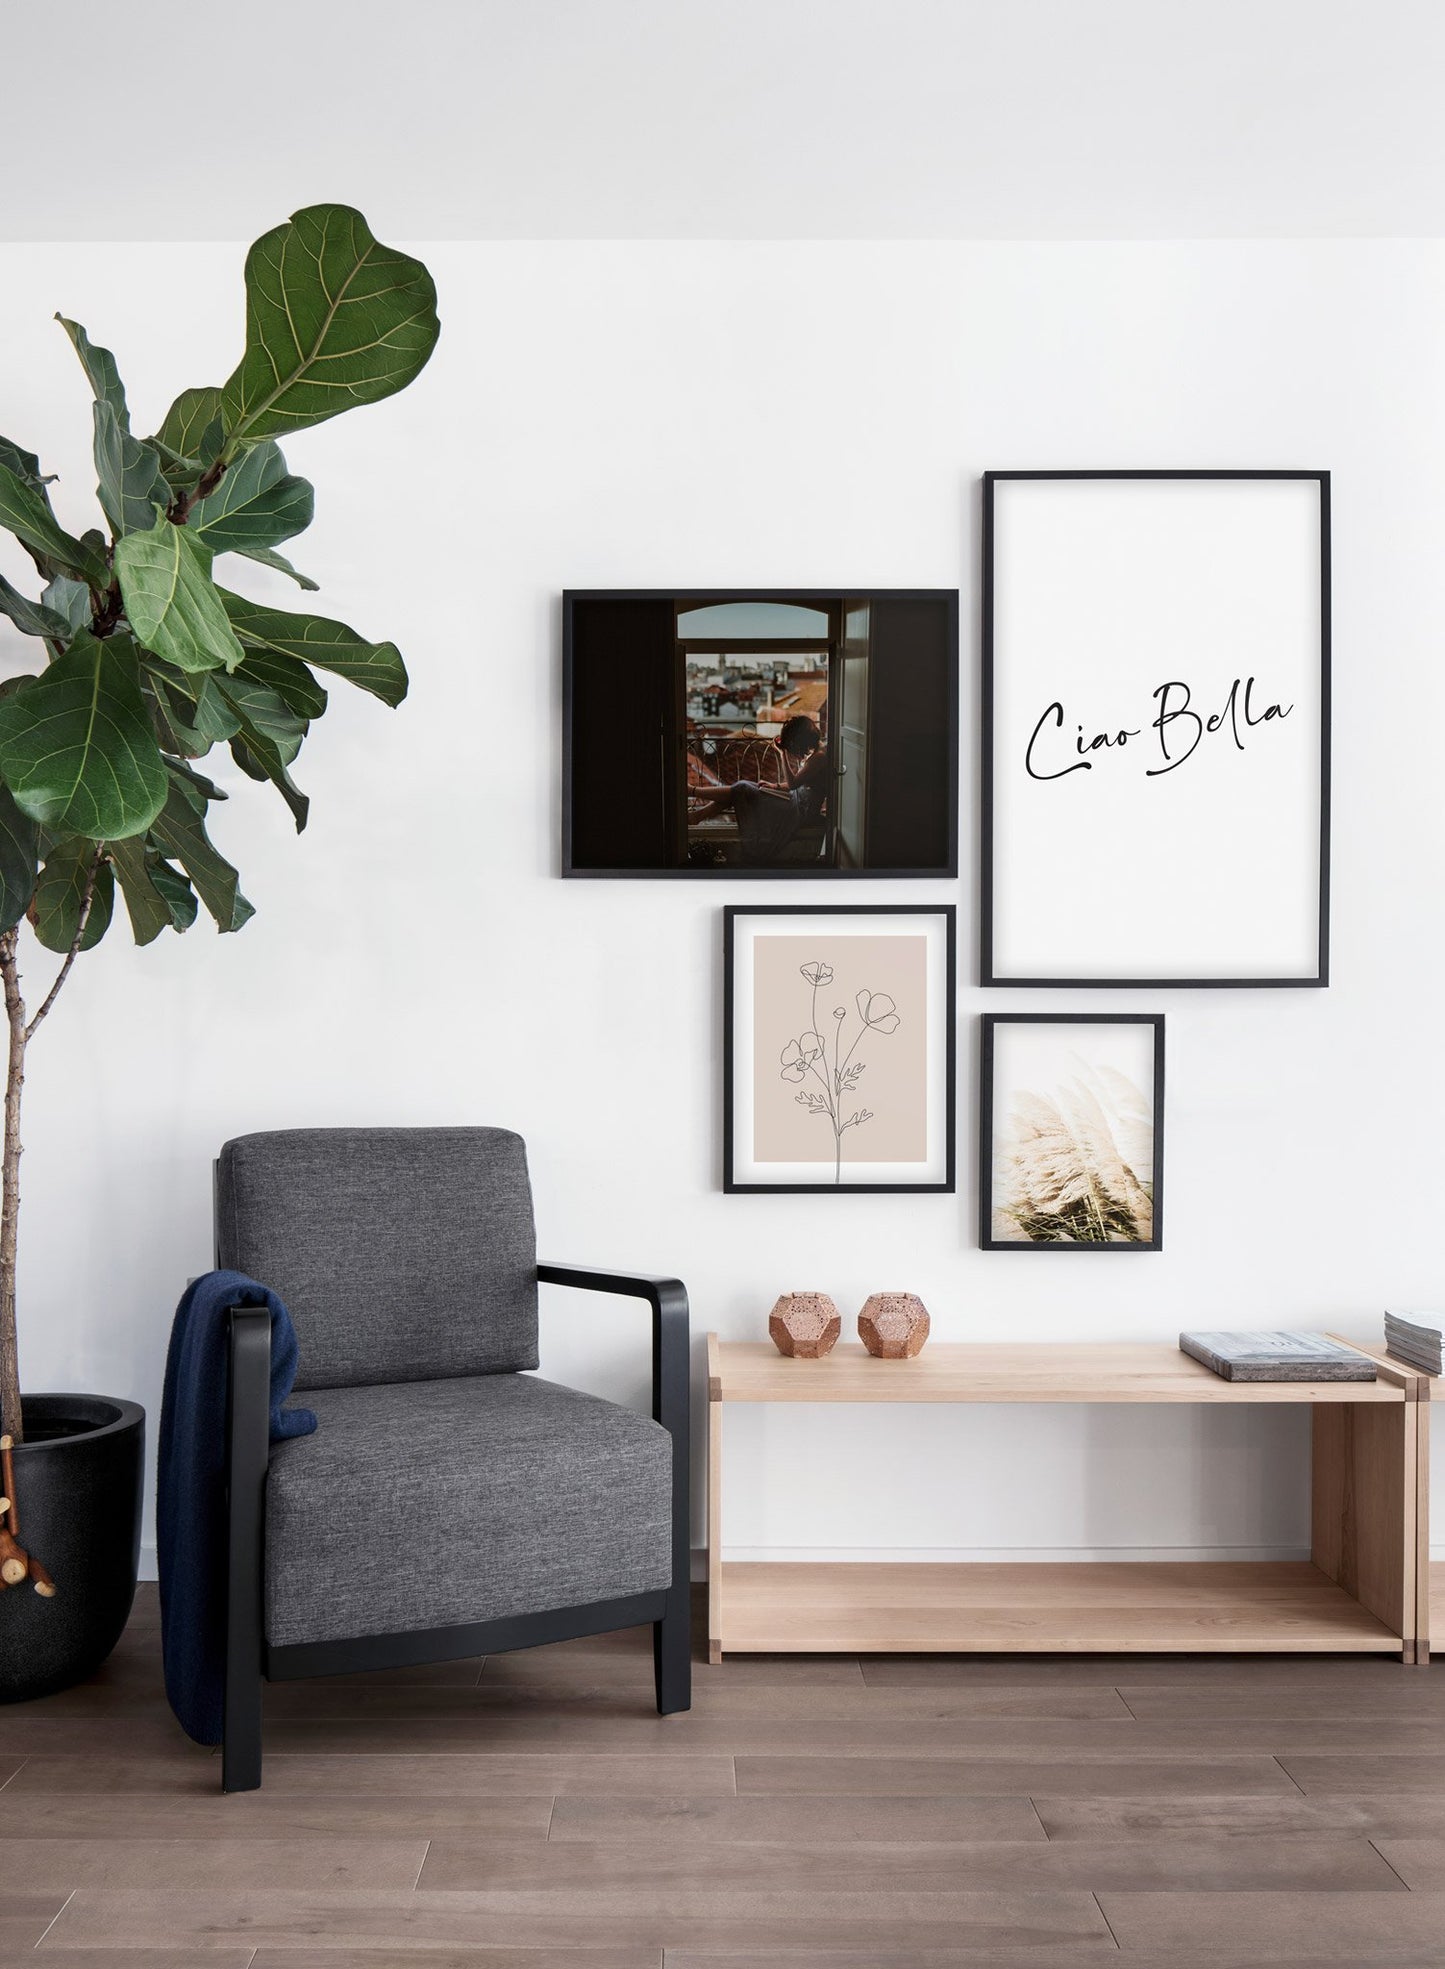 Scandinavian poster by Opposite Wall with black and white graphic typography design of Ciao Bella - Living room with Gallery Wall